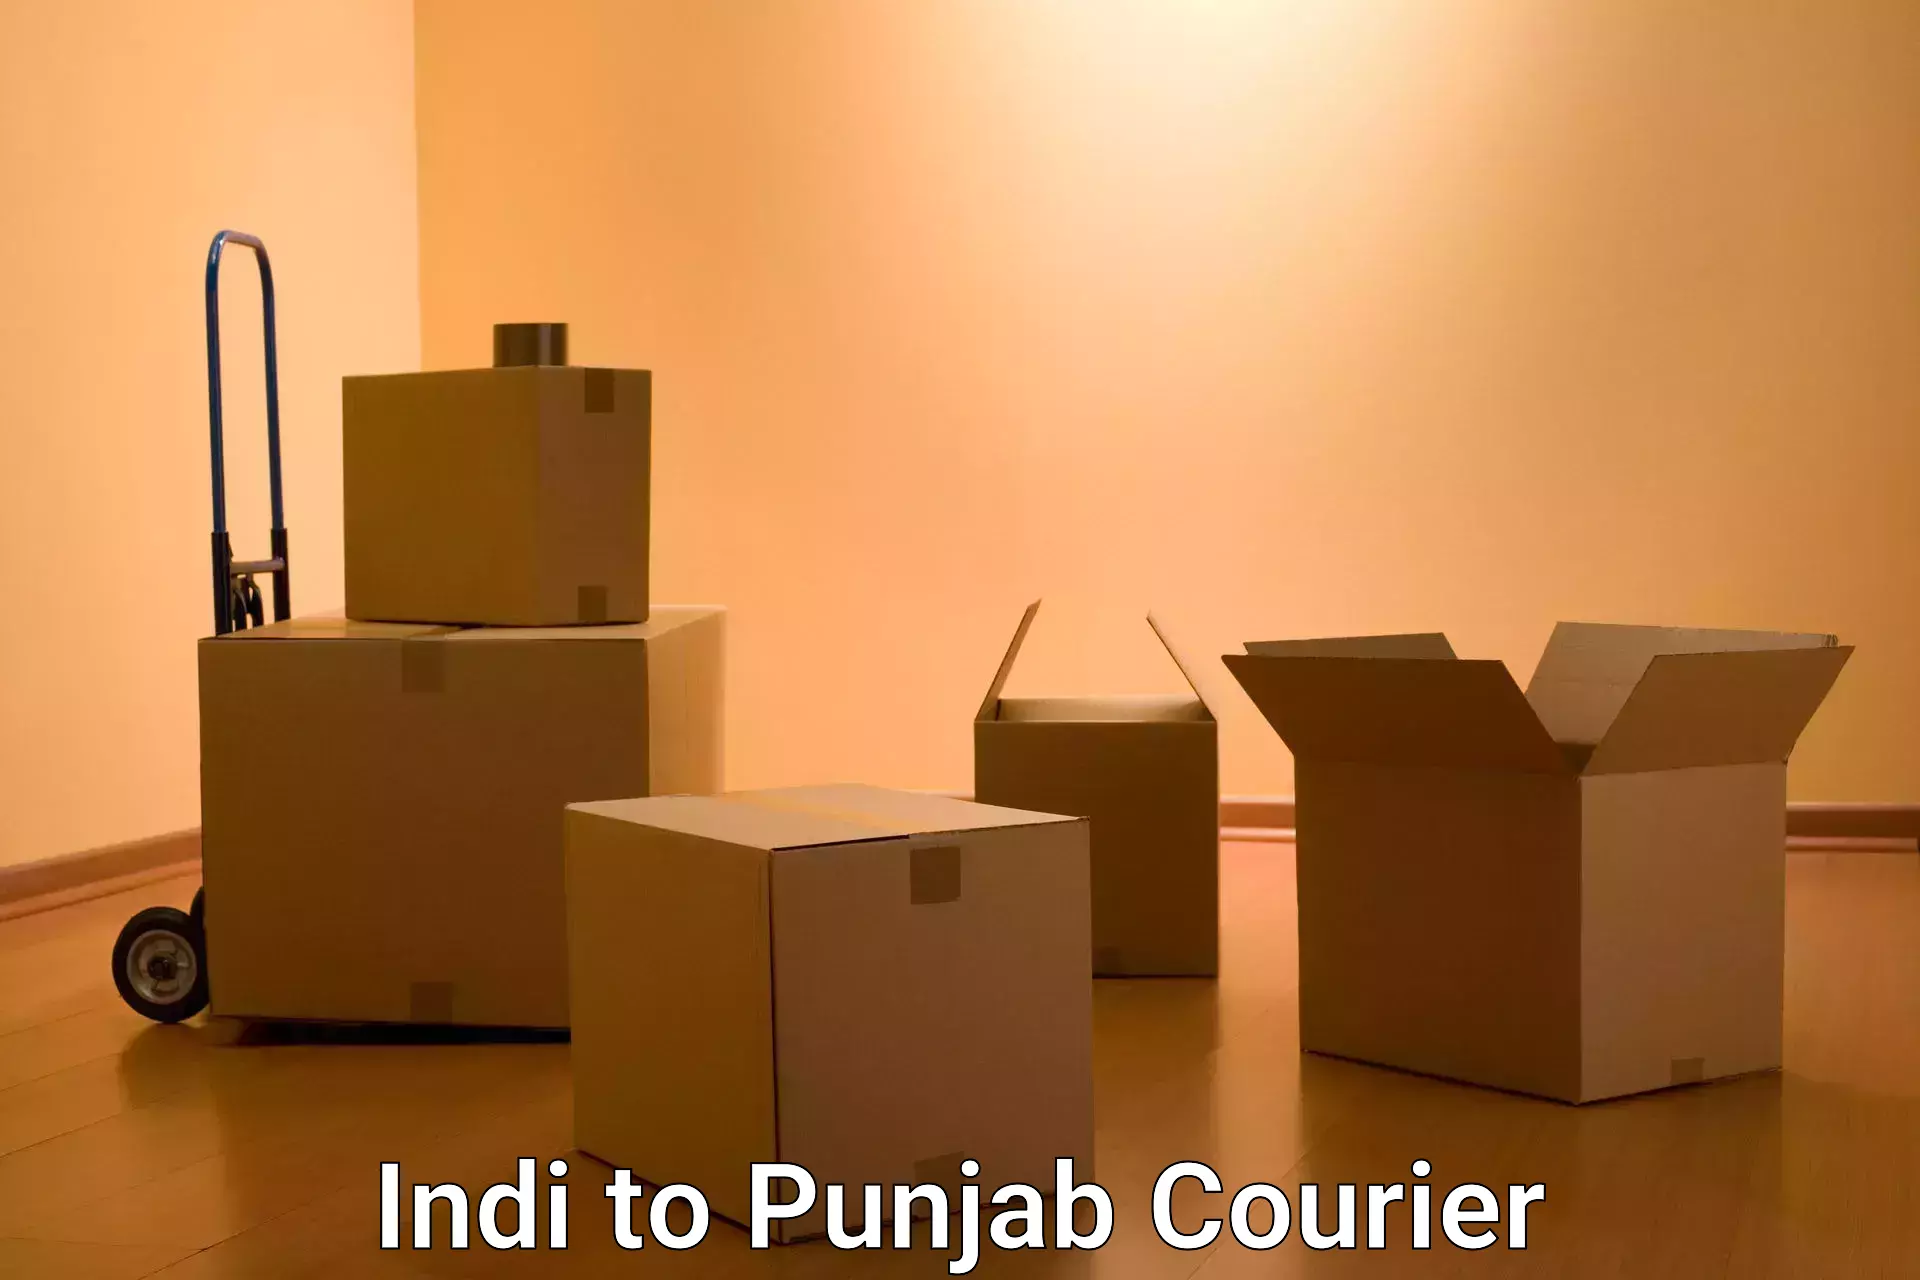 24-hour courier service Indi to Punjab